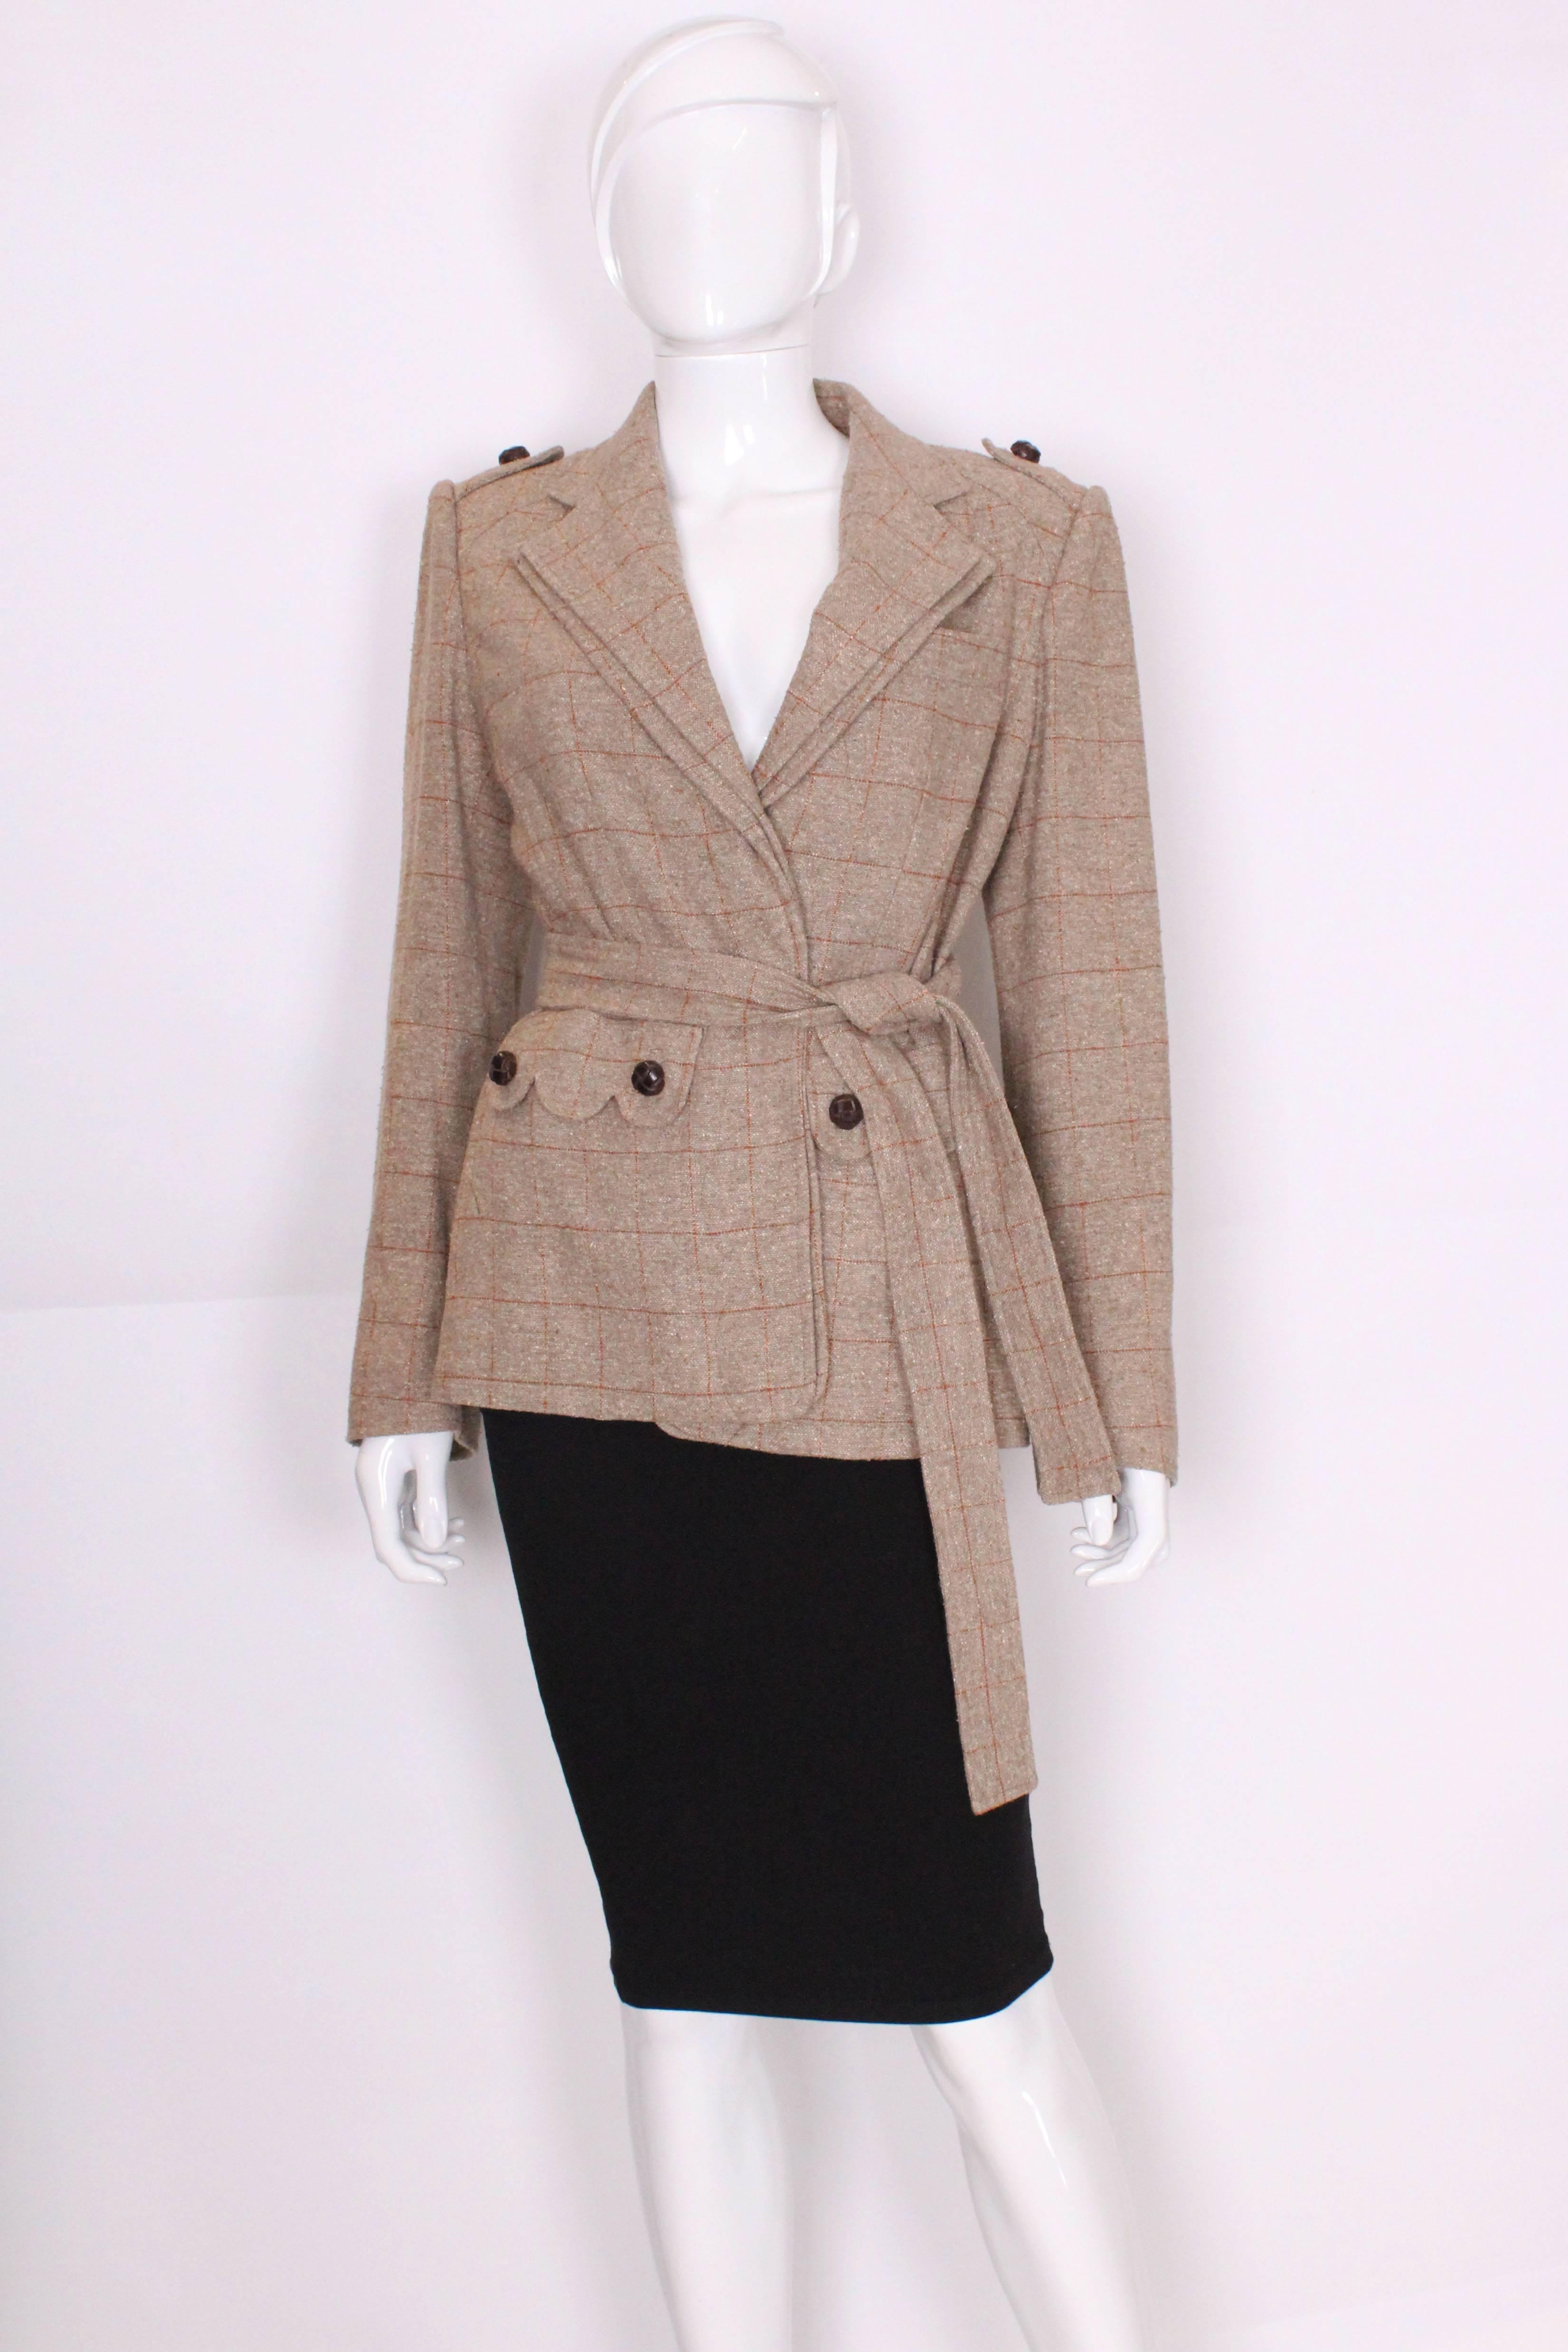 A great jacket for Fall from Yves Saint Laurent, Rive Gauche .The jacket is in a silk/linen mix, in a light brown speckled fabric . It has one breast pocket on the left hand side and two pockets at waist level. The buttons are covered in brown